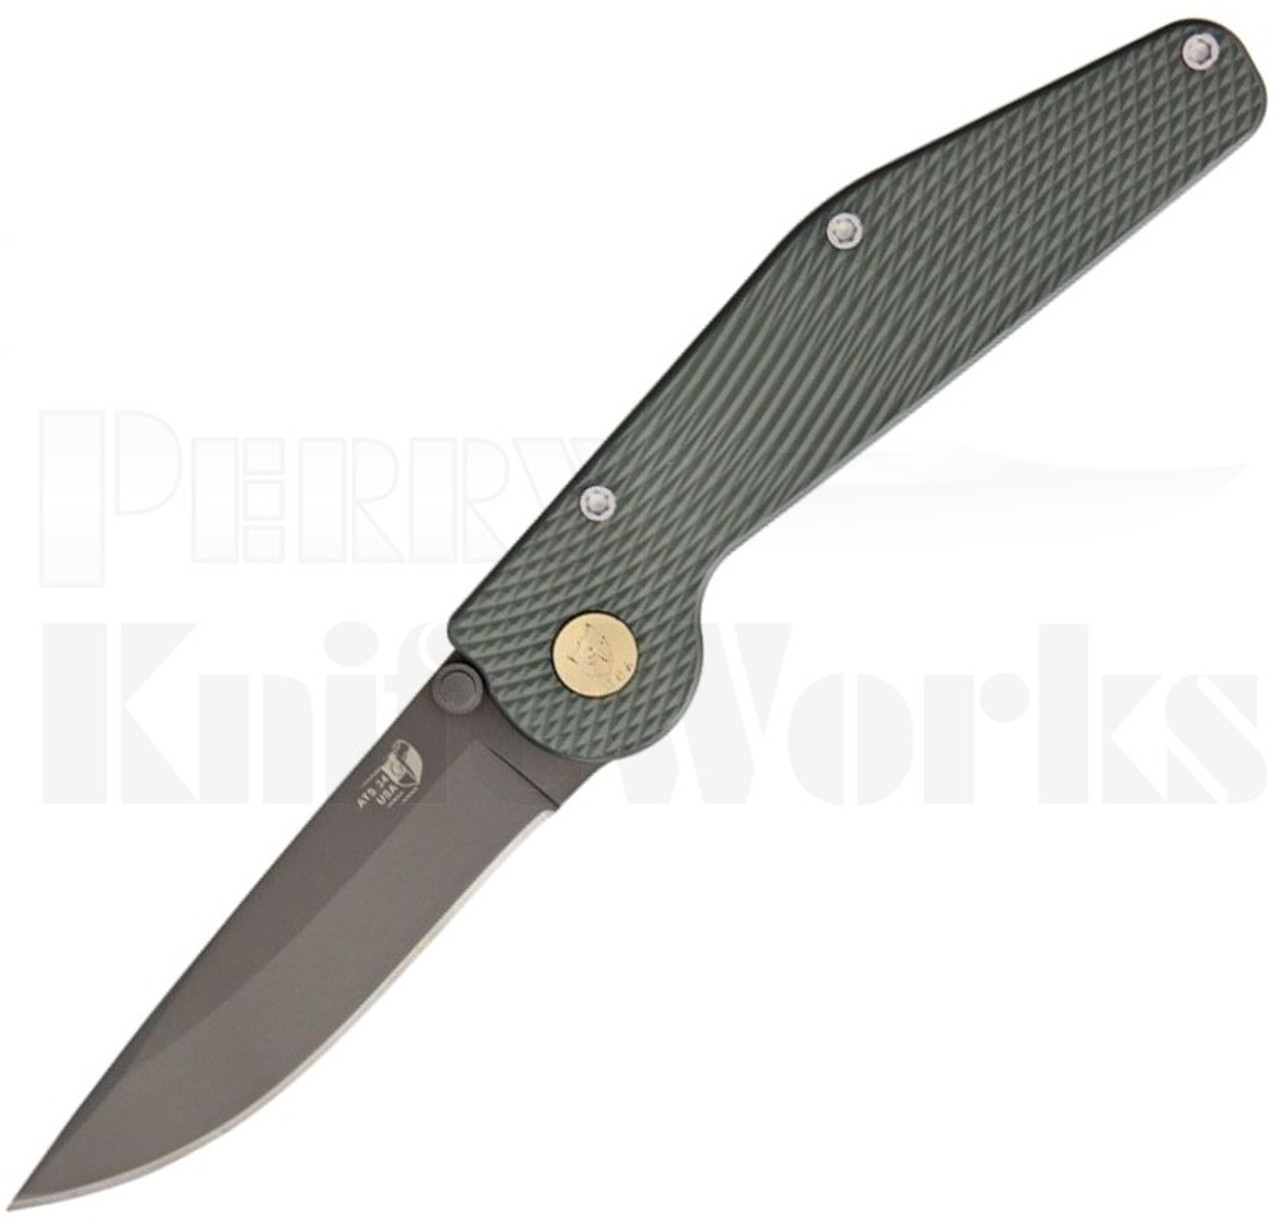 GT Knives Police Automatic Knife Green l 3.6" Black GT111 l For Sale